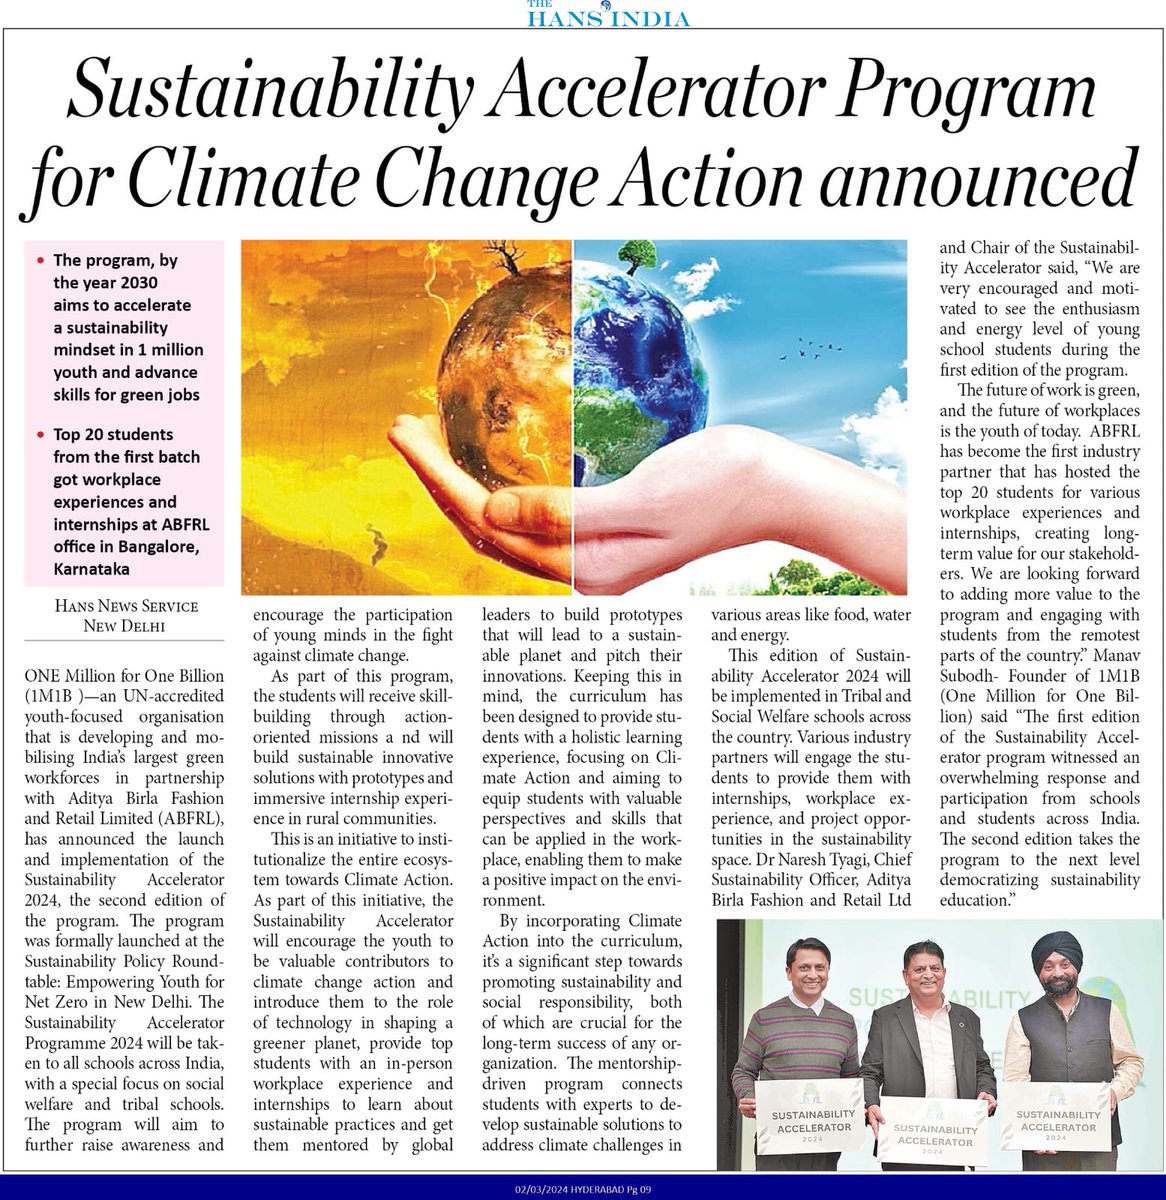 🌍 Exciting News! #1M1B unveils the 2nd edition of the Sustainability Accelerator 2024 in collaboration with @AdityaBirlaGrp Fashion and Retail Limited! Launched during the Sustainability Policy Roundtable, this initiative aims to empower youth for a #NetZero future. 📚 The